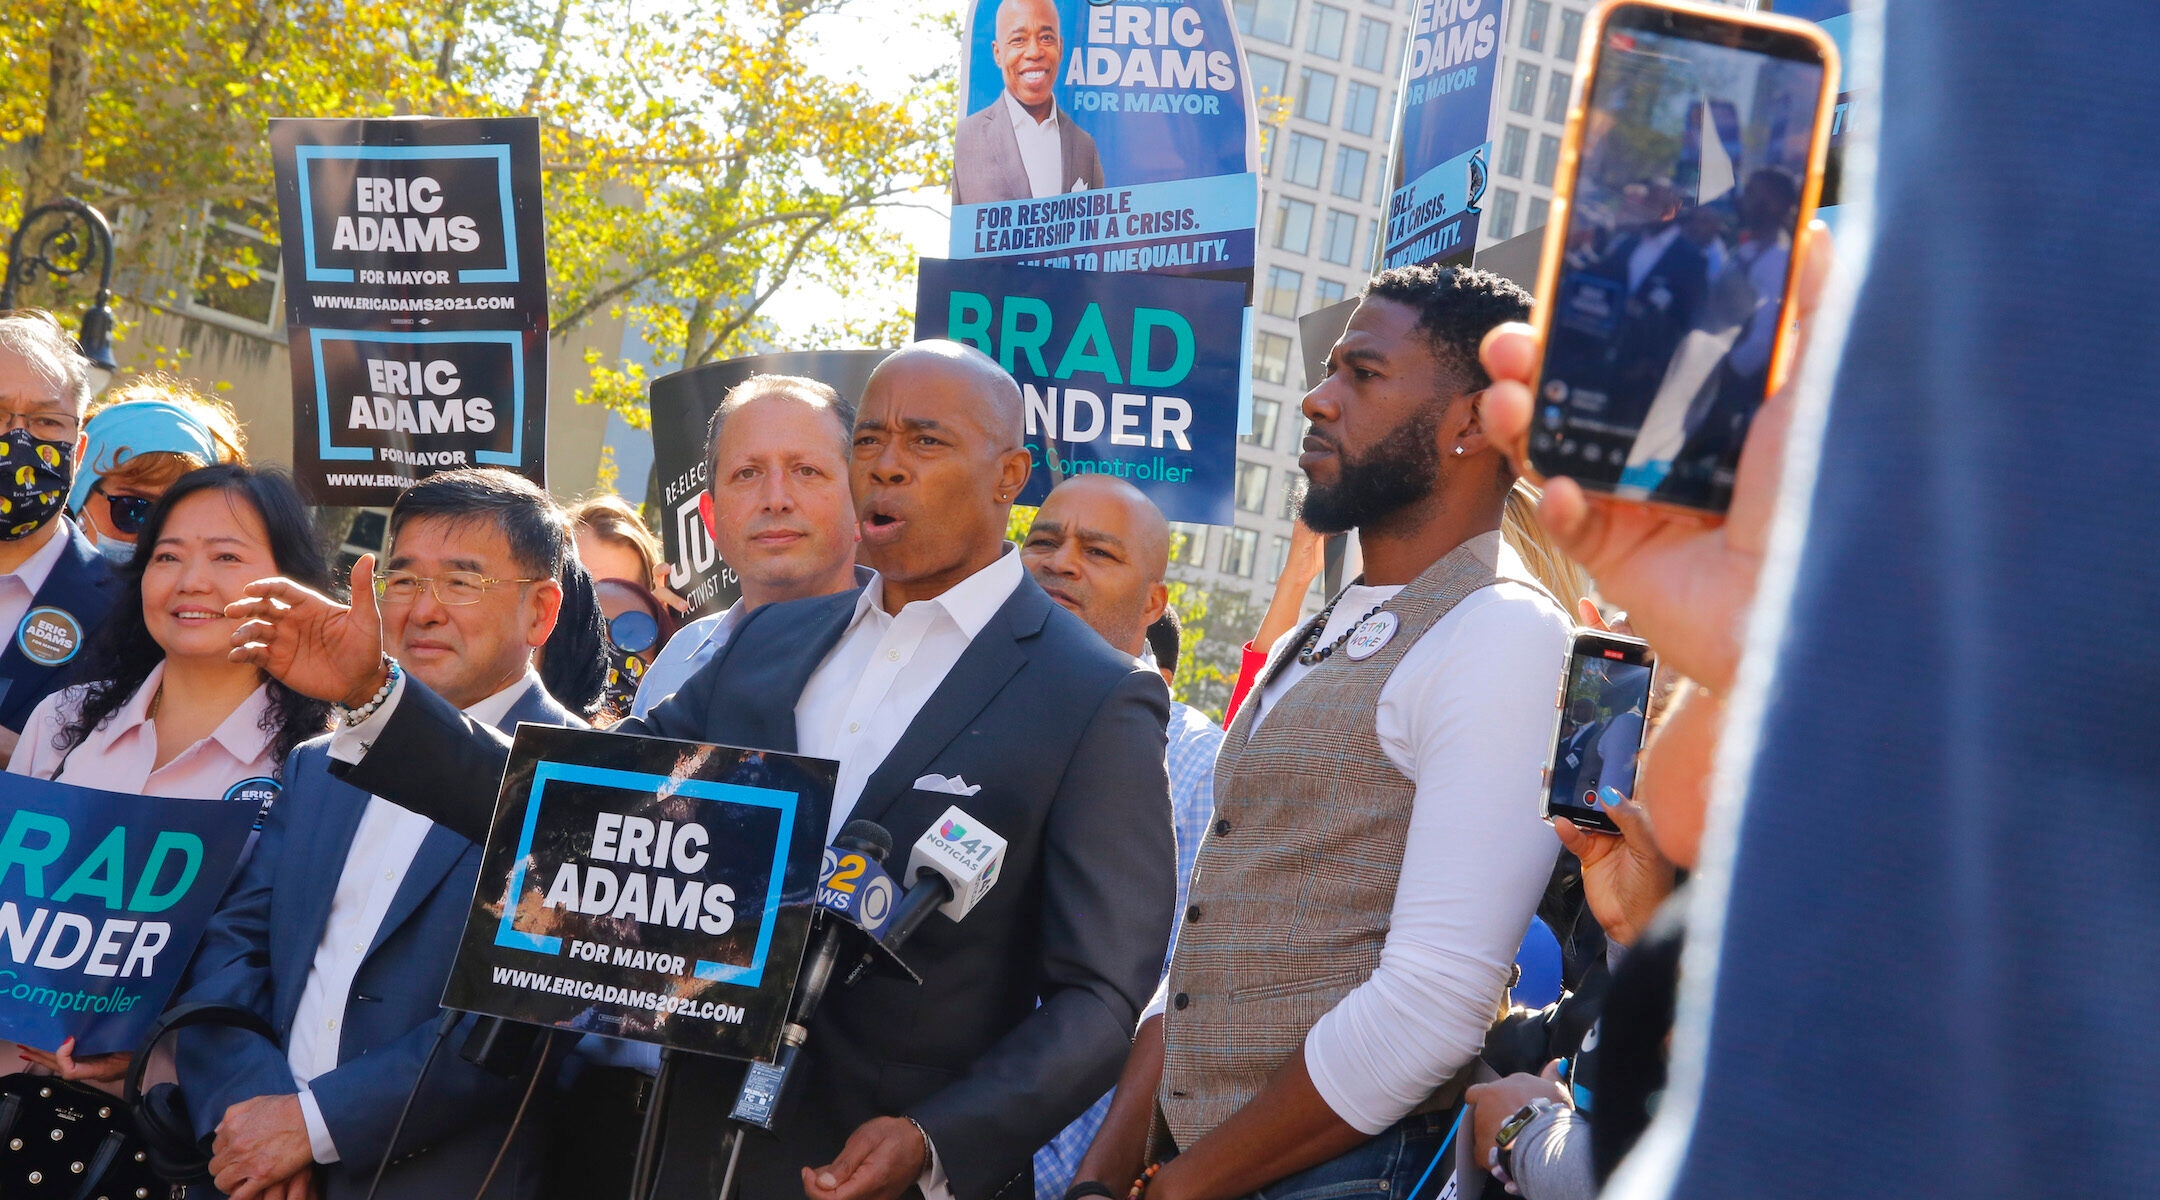 Eric Adams and other Democrats at a rally in Brooklyn